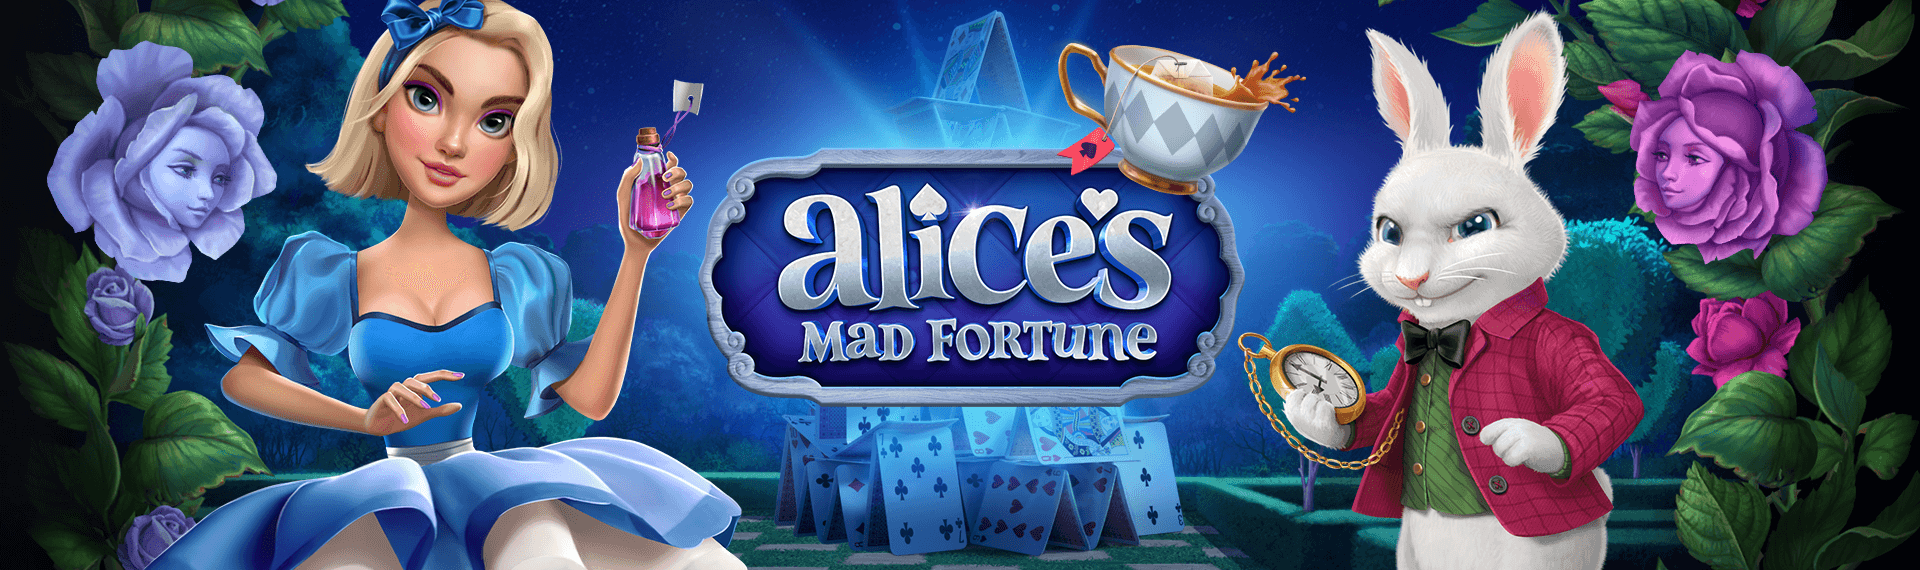 Alice's Mad Fortune Screenshot <br />
<b>Notice</b>:  Undefined variable: key in <b>/var/www/html/wp-content/themes/armadillo/page-game.php</b> on line <b>37</b><br />
1